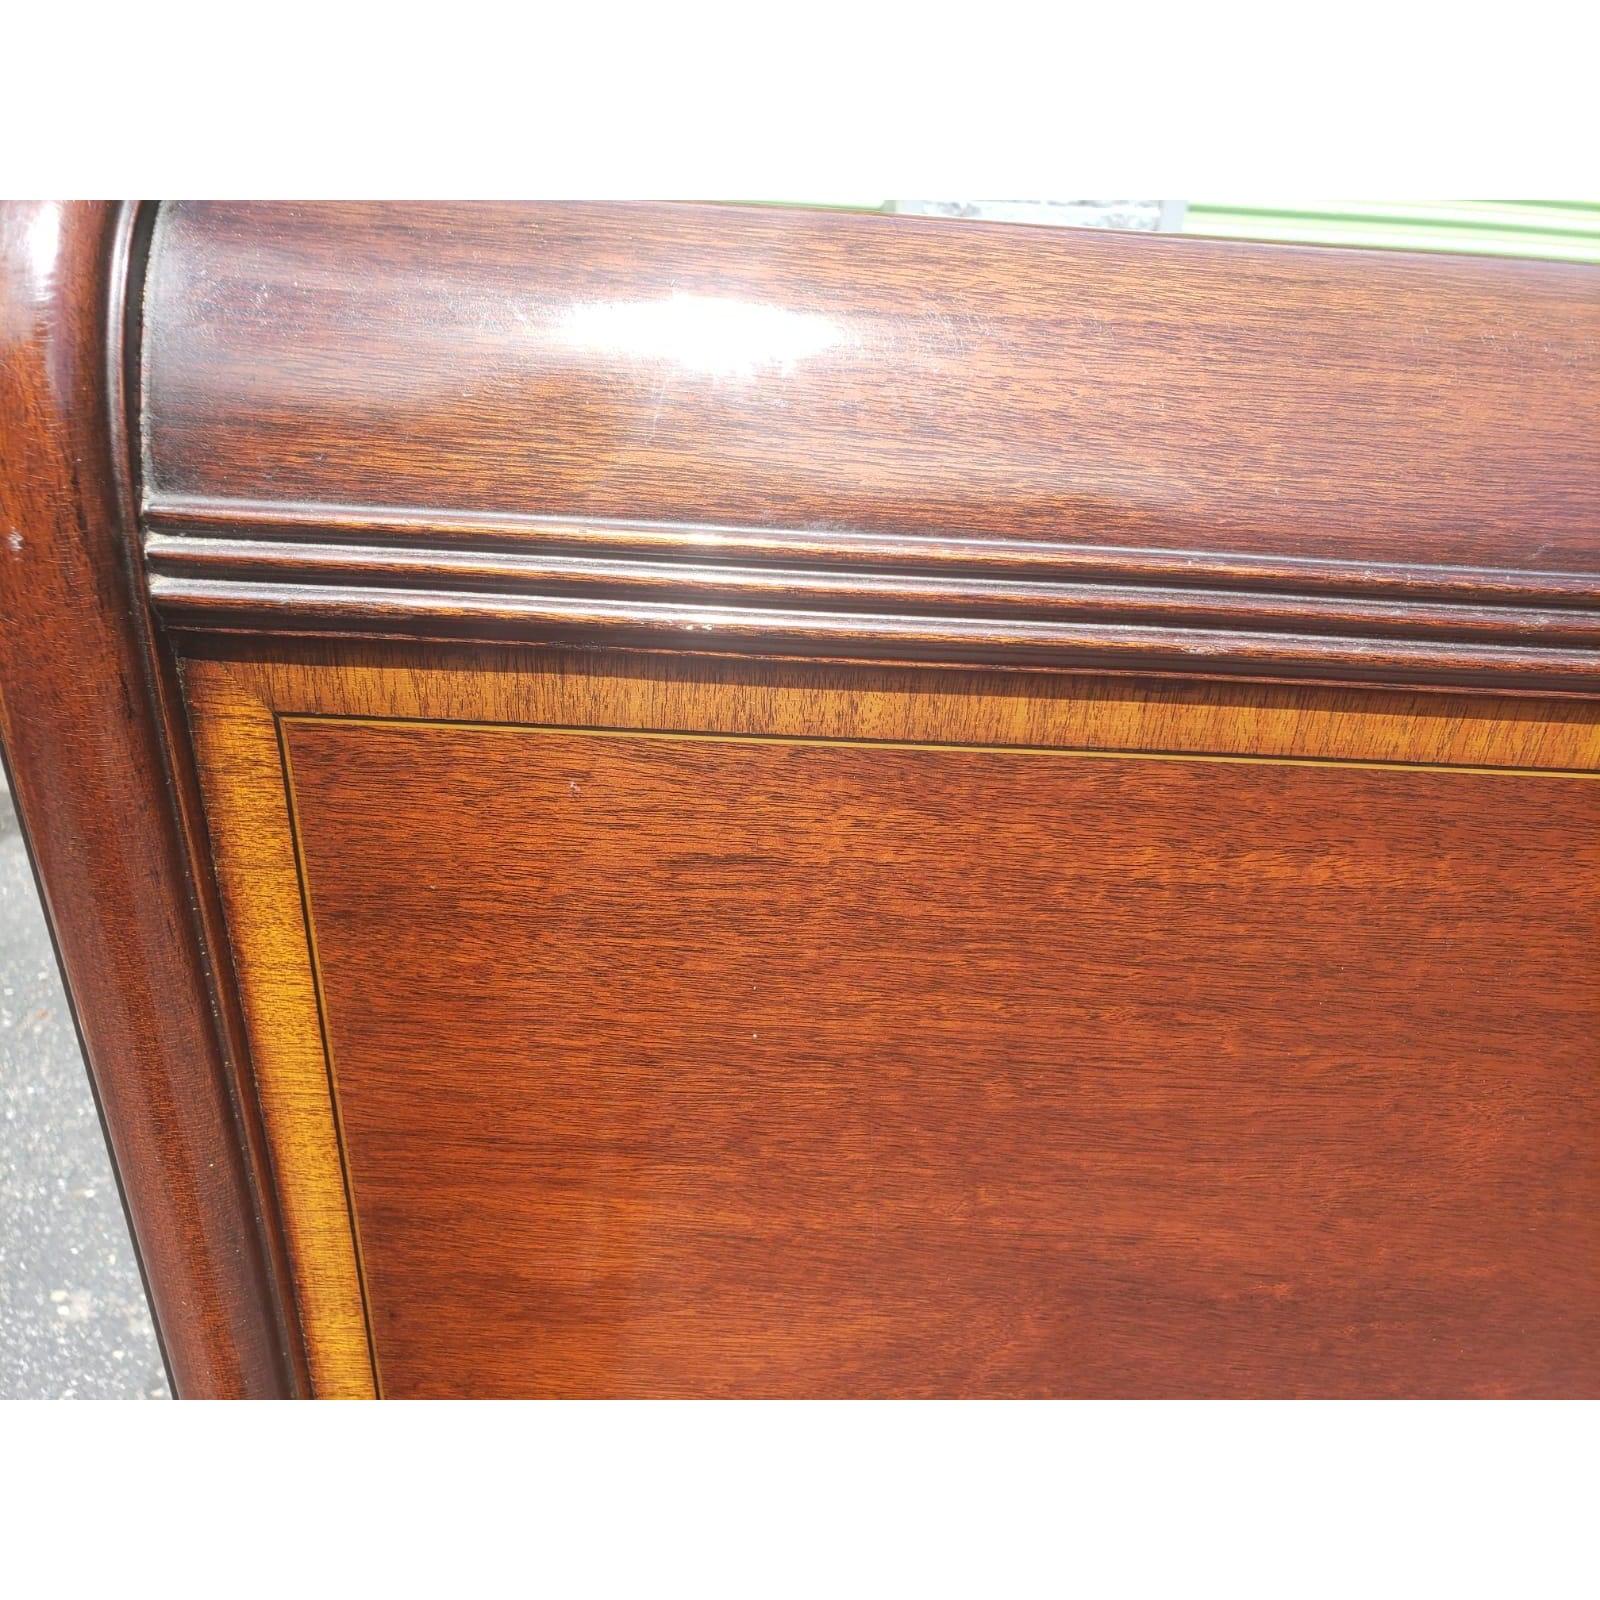 1950s Johnson Furniture mahogany banded sleigh bed. Mahogany veneer finish. Good condition. Queen size. 56